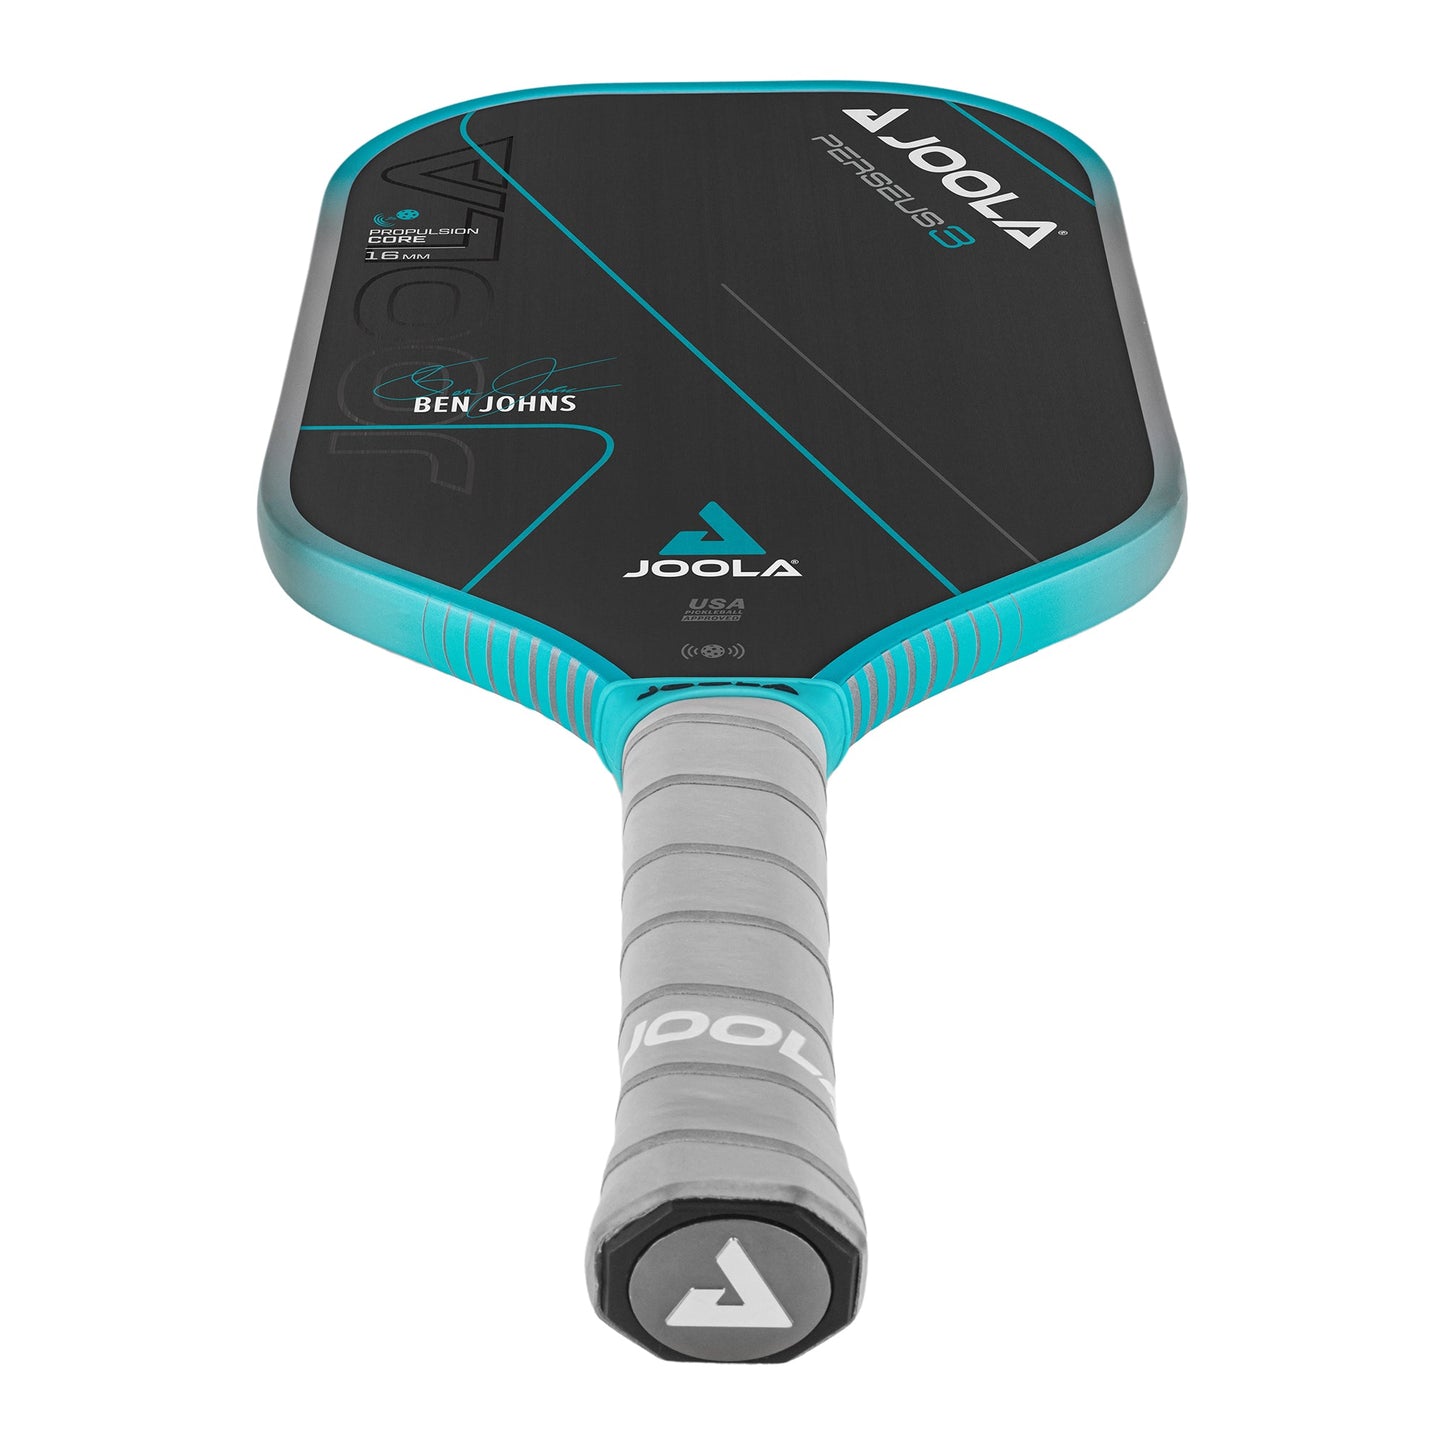 A JOOLA Ben Johns Perseus 3 14mm Pickleball Paddle with a black and teal color scheme and a grey grip handle.